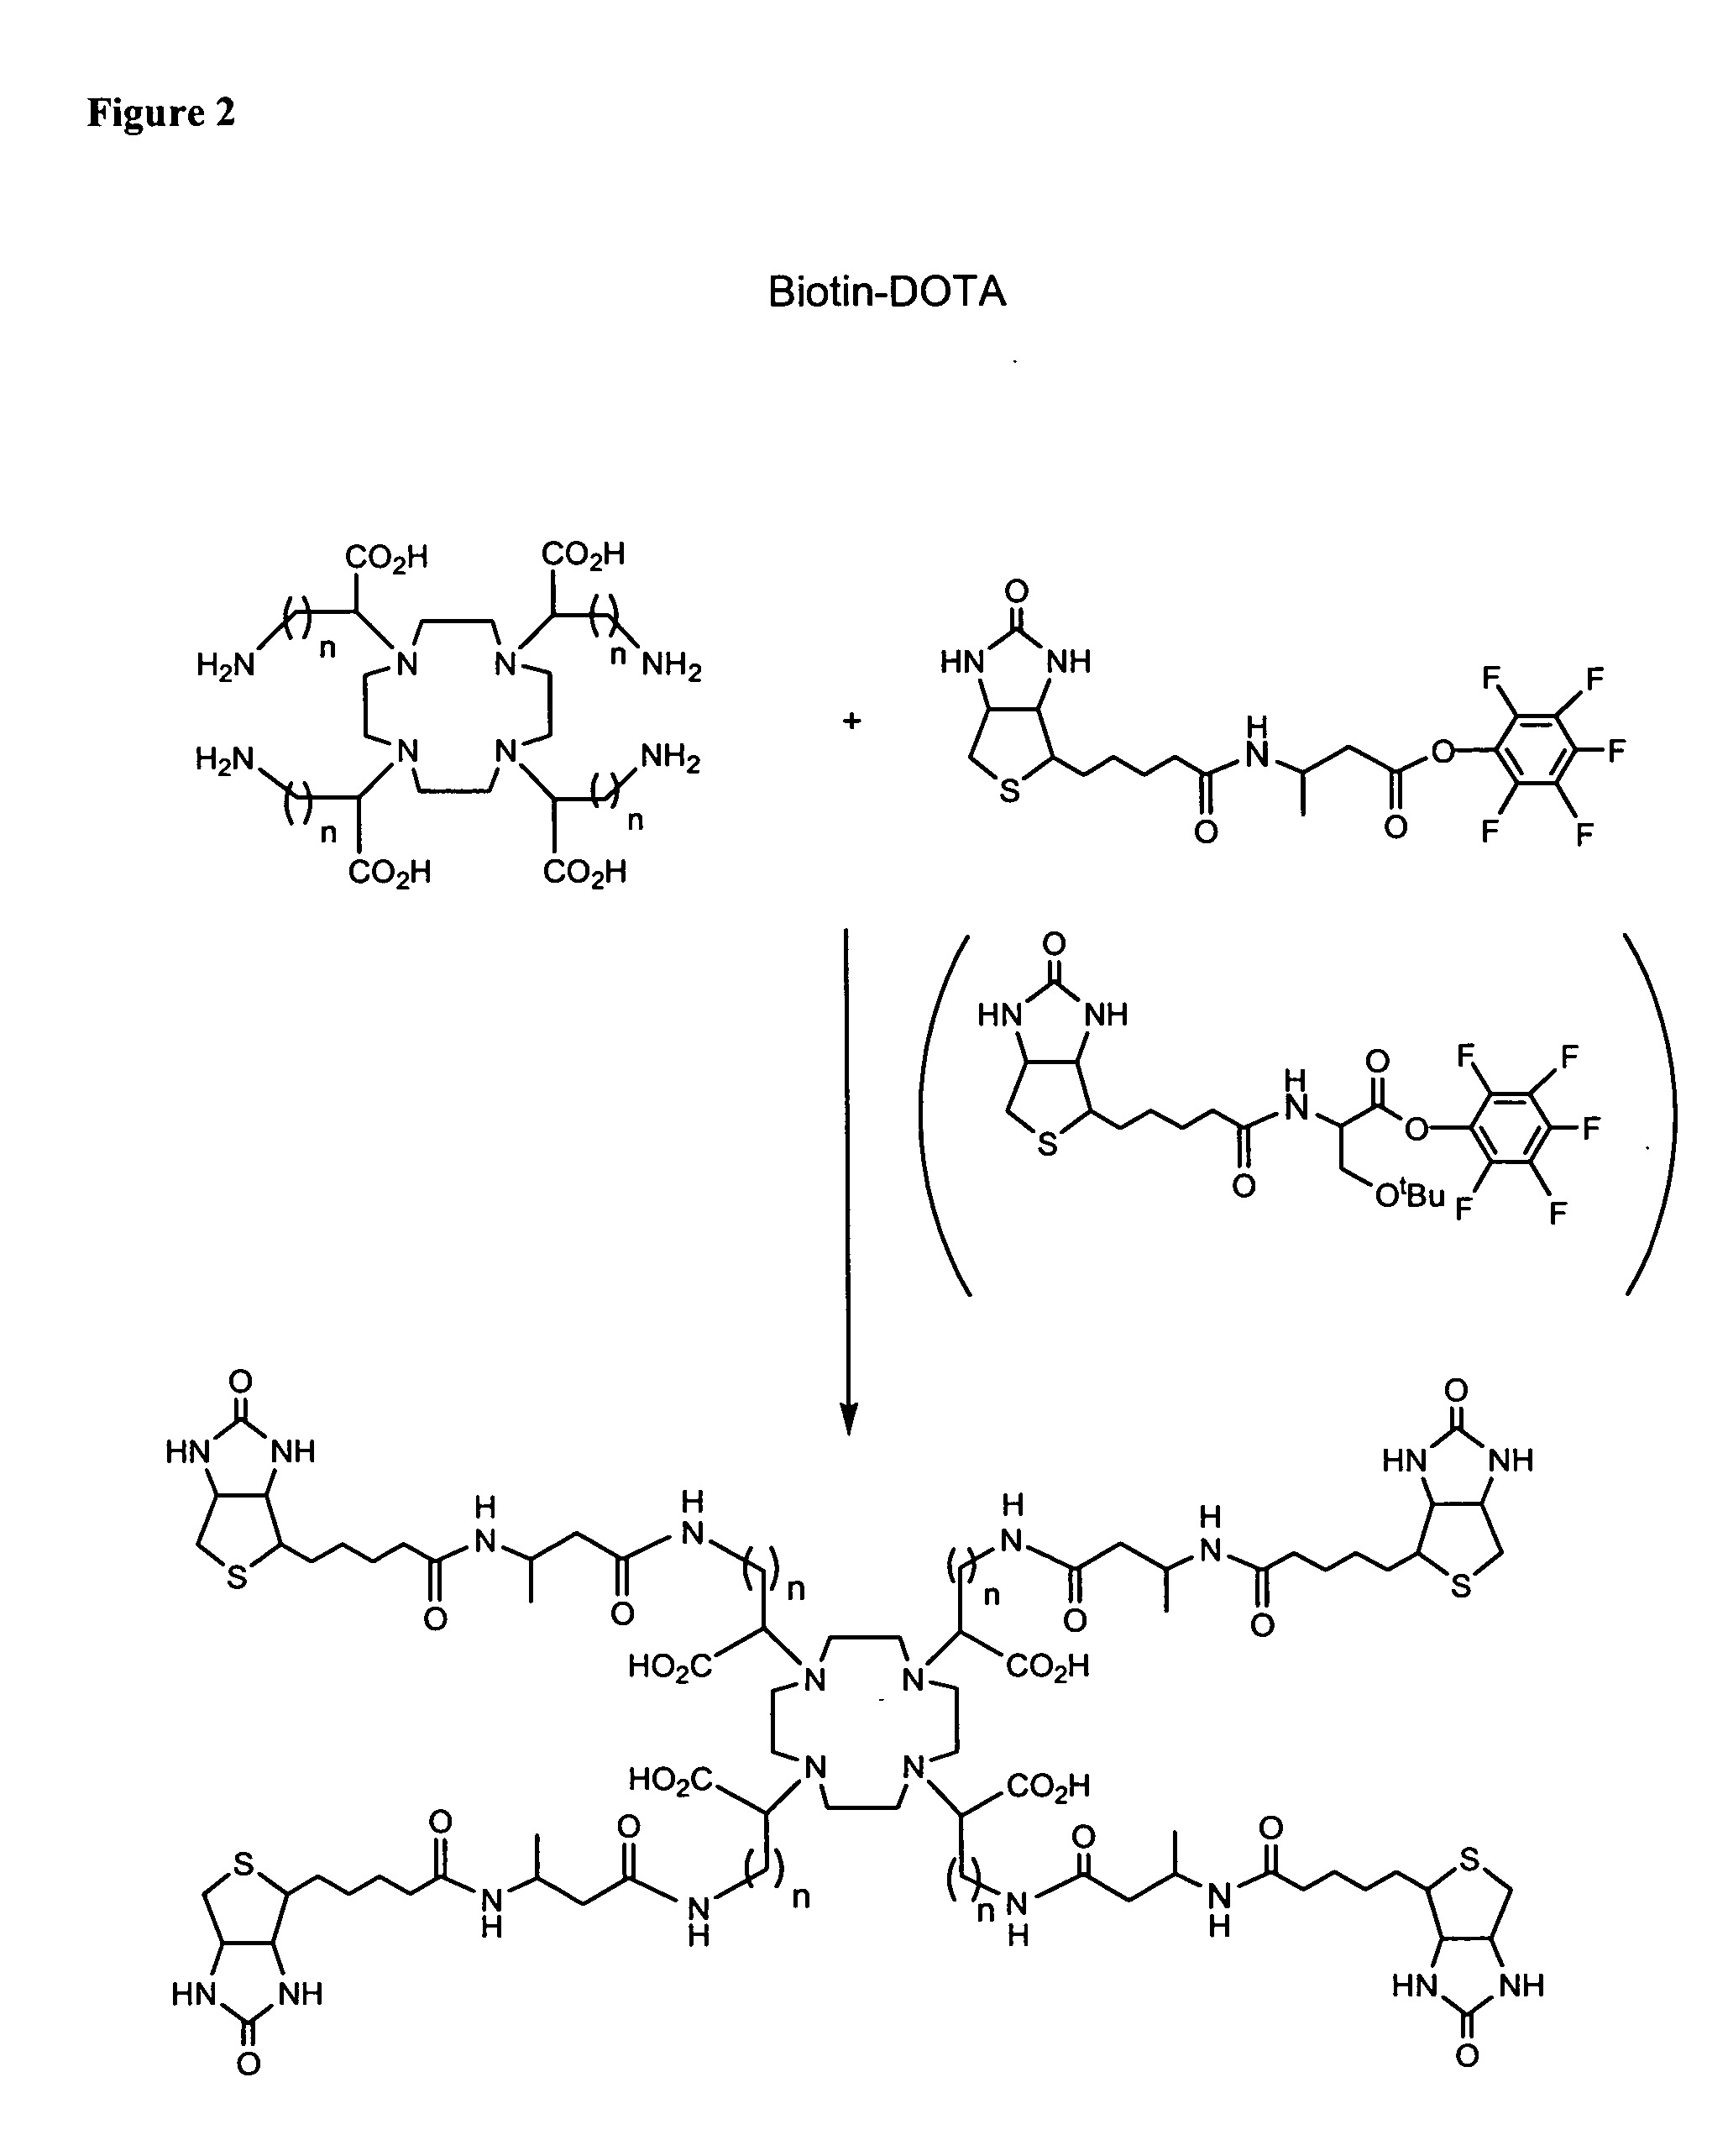 Polybiotin compounds for magnetic resonance imaging and drug delivery